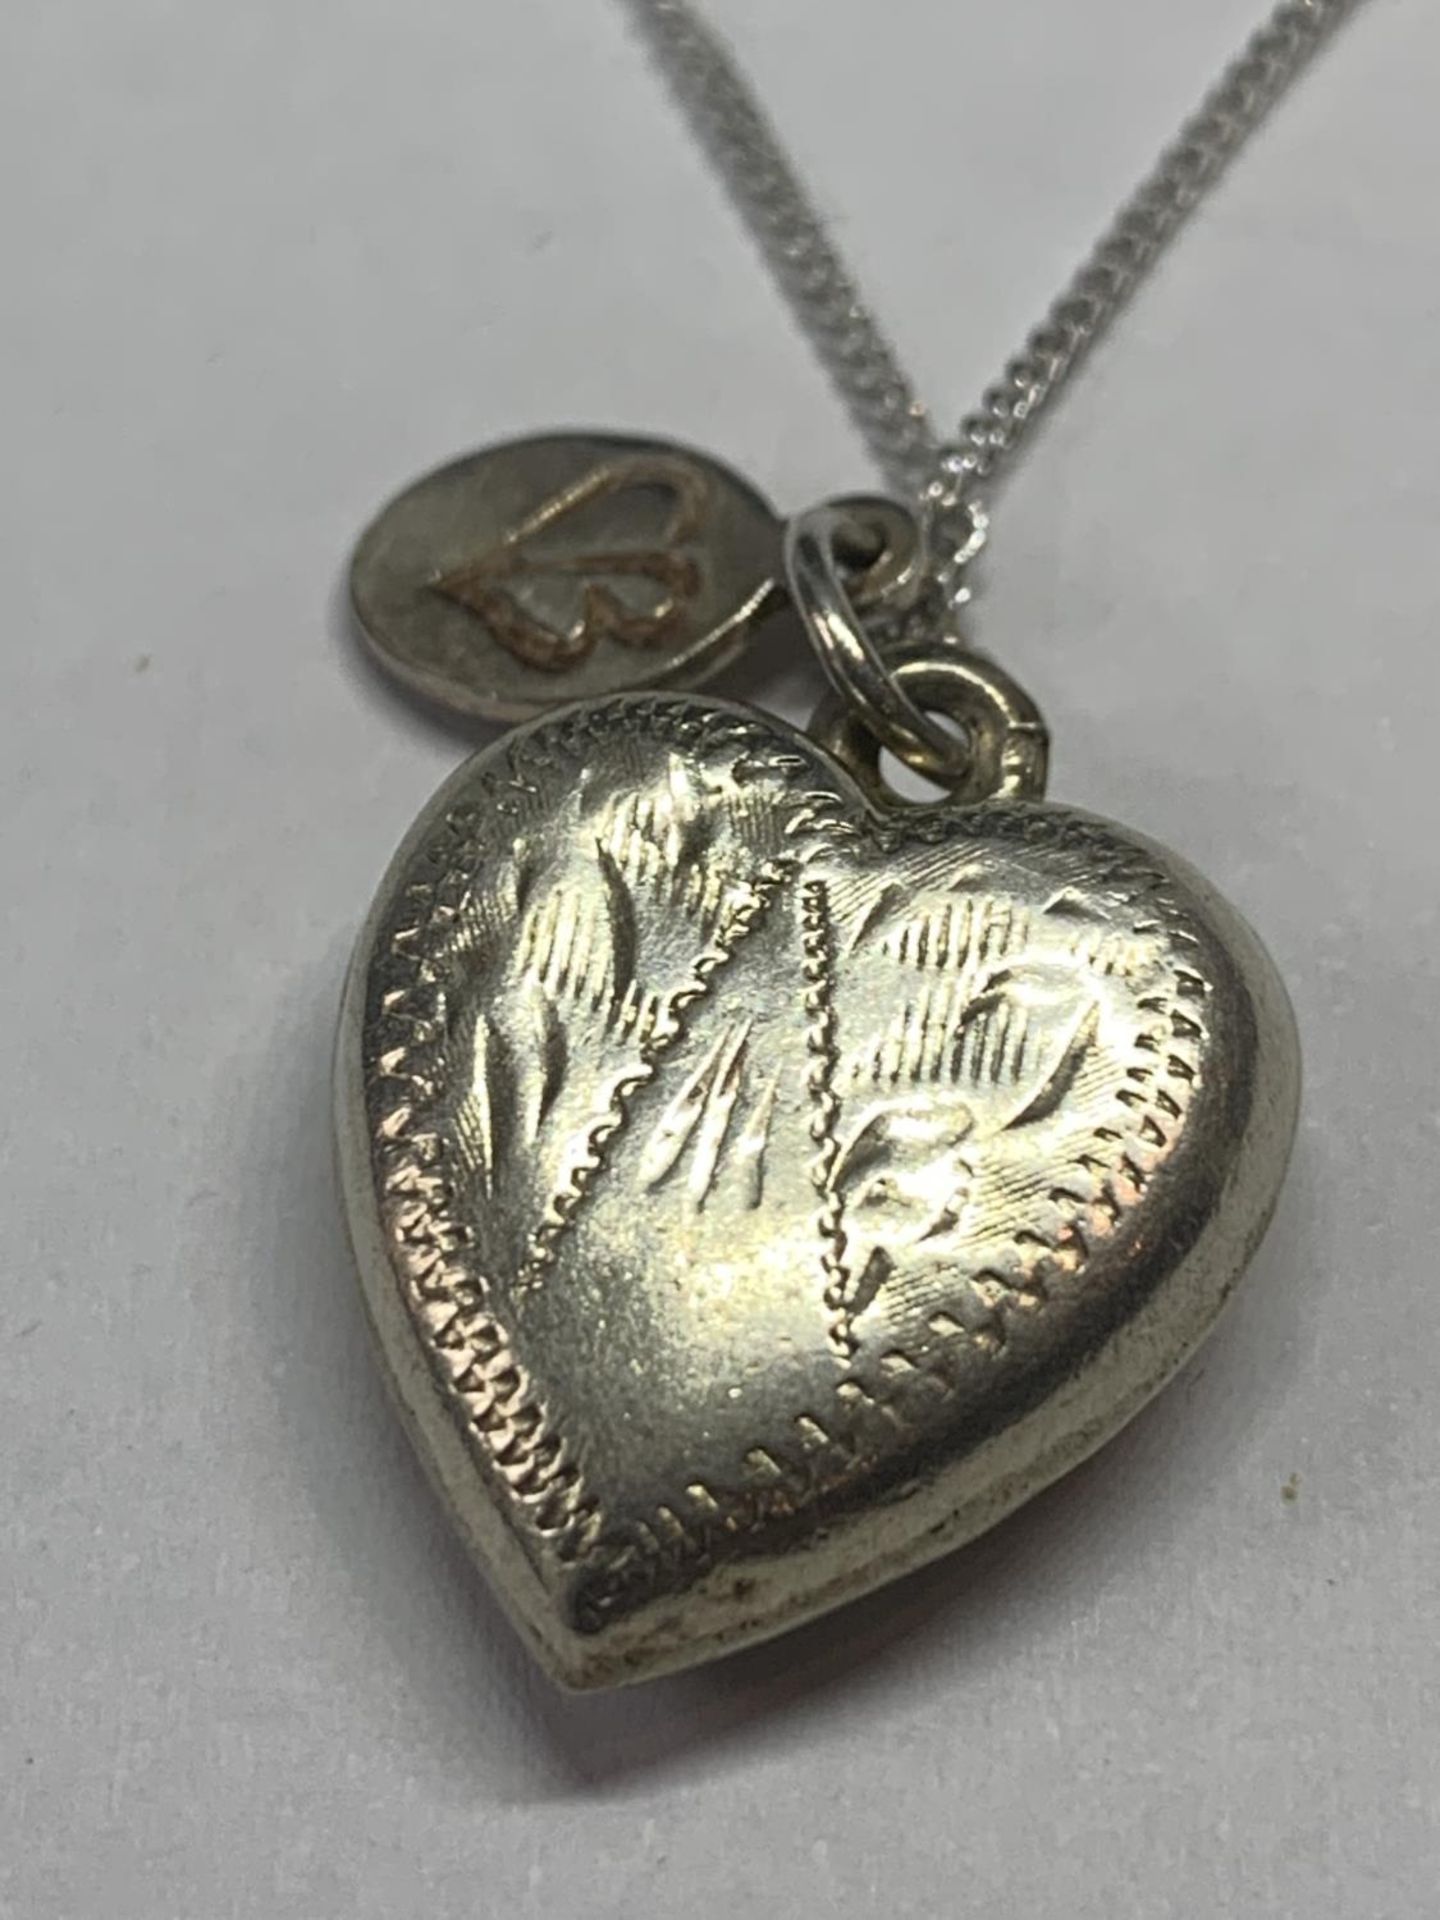 A MARKED 925 SILVER HEART PENDANT AND CHAIN IN A PRESENTATION BOX - Image 3 of 5